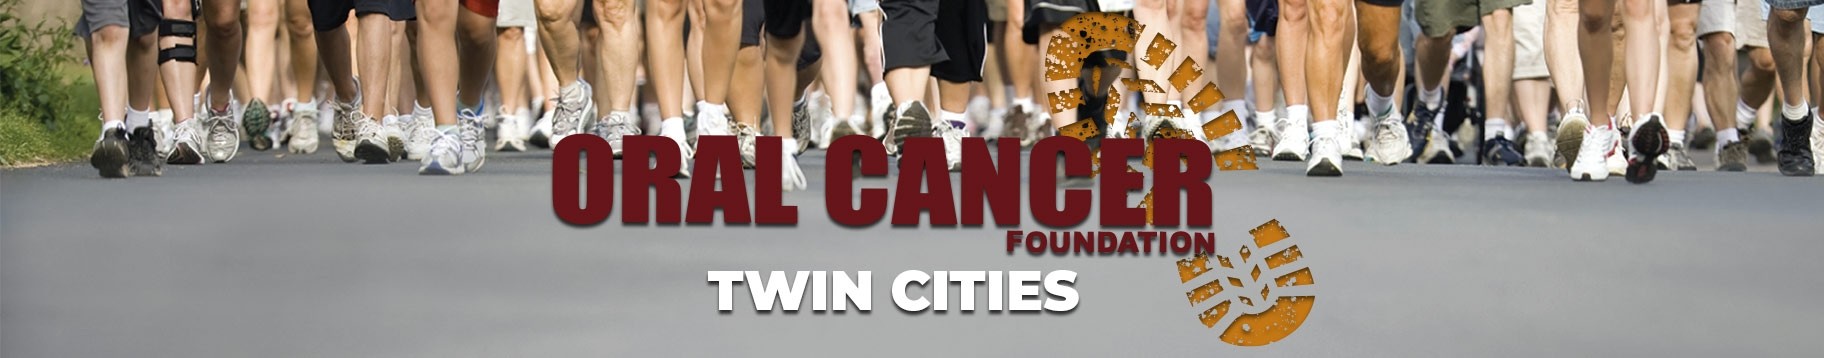 Twin Cities Oral Cancer Fundraiser